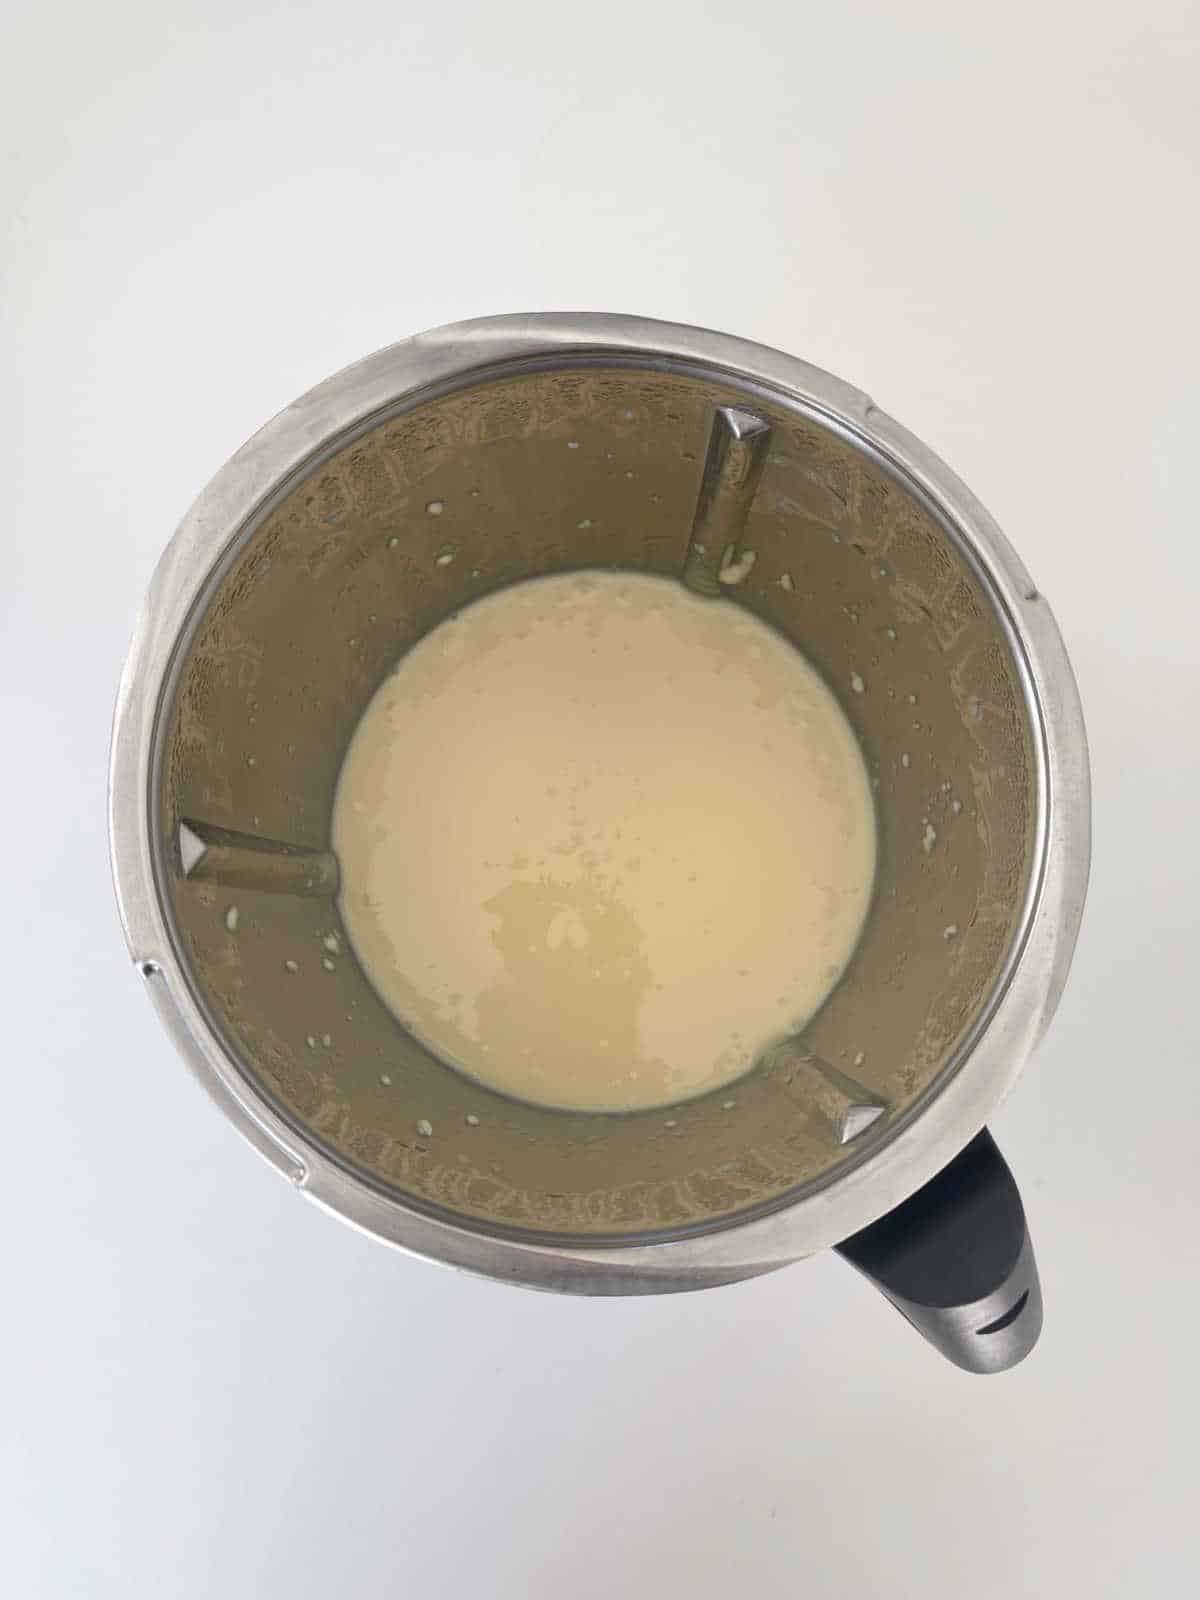 white chocolate and condensed milk melted in a Thermomix bowl.